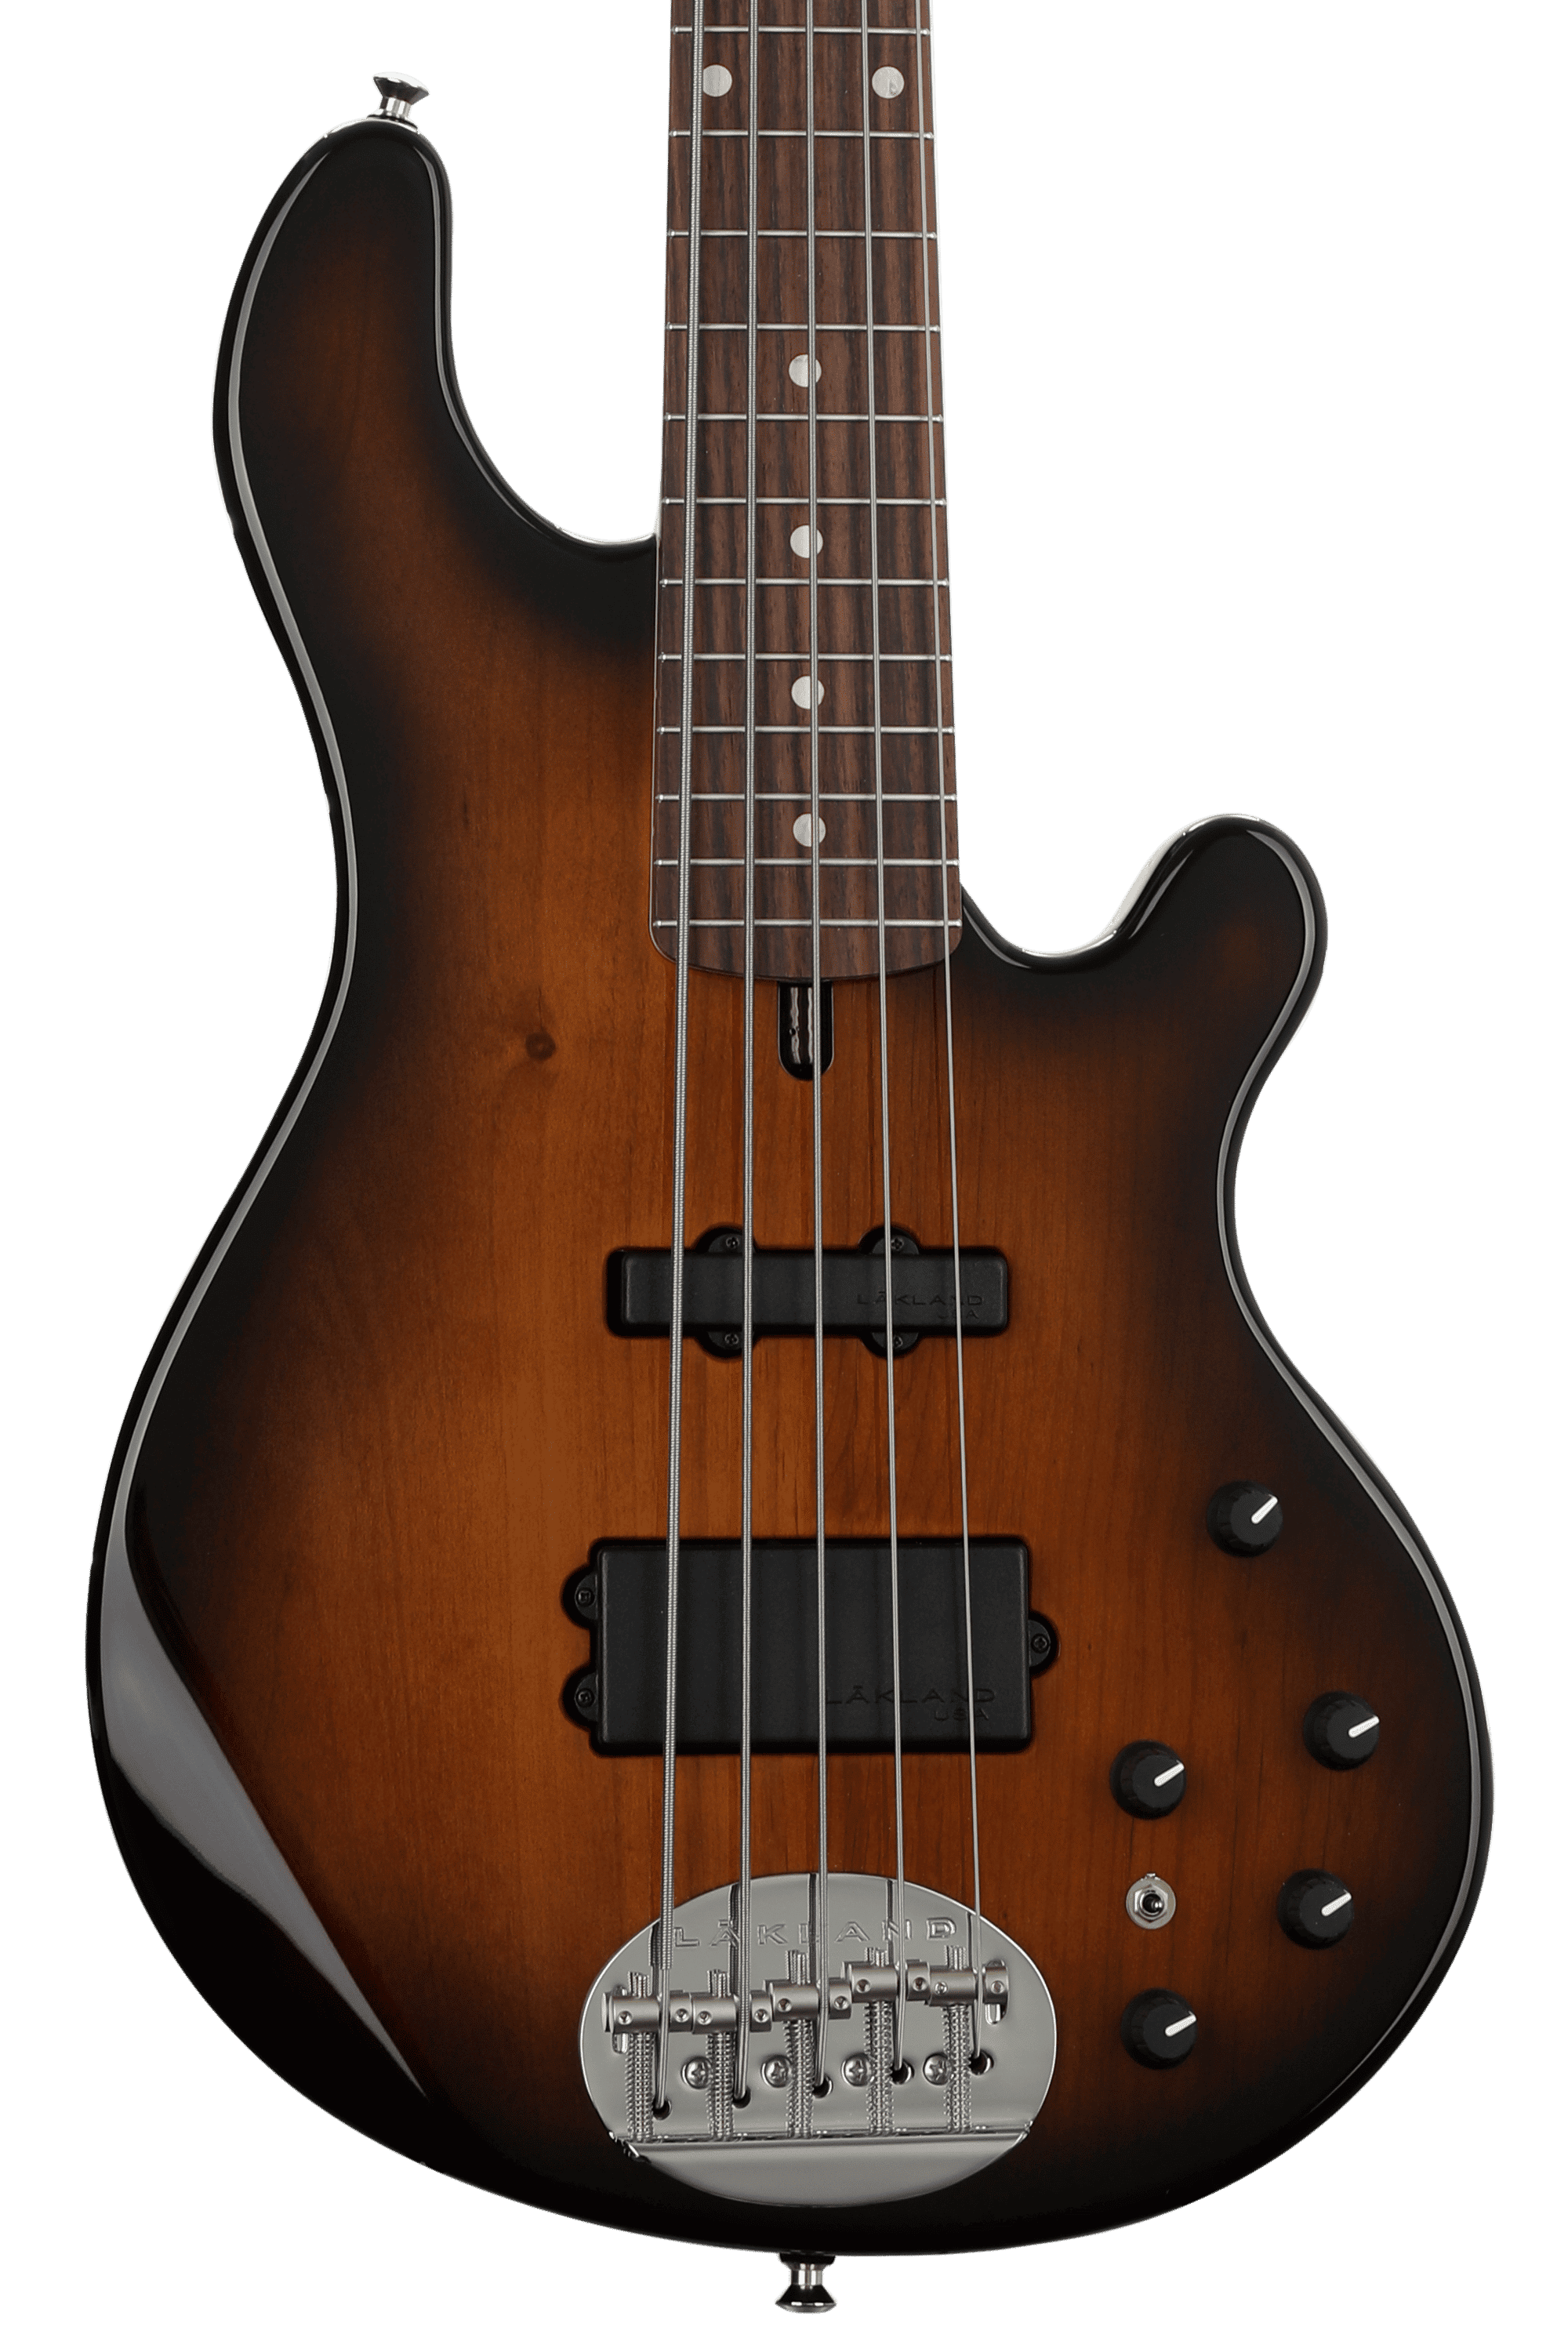 Lakland USA Classic 55-14 5-string Bass Guitar - Tobacco Sunburst with  Rosewood Fingerboard